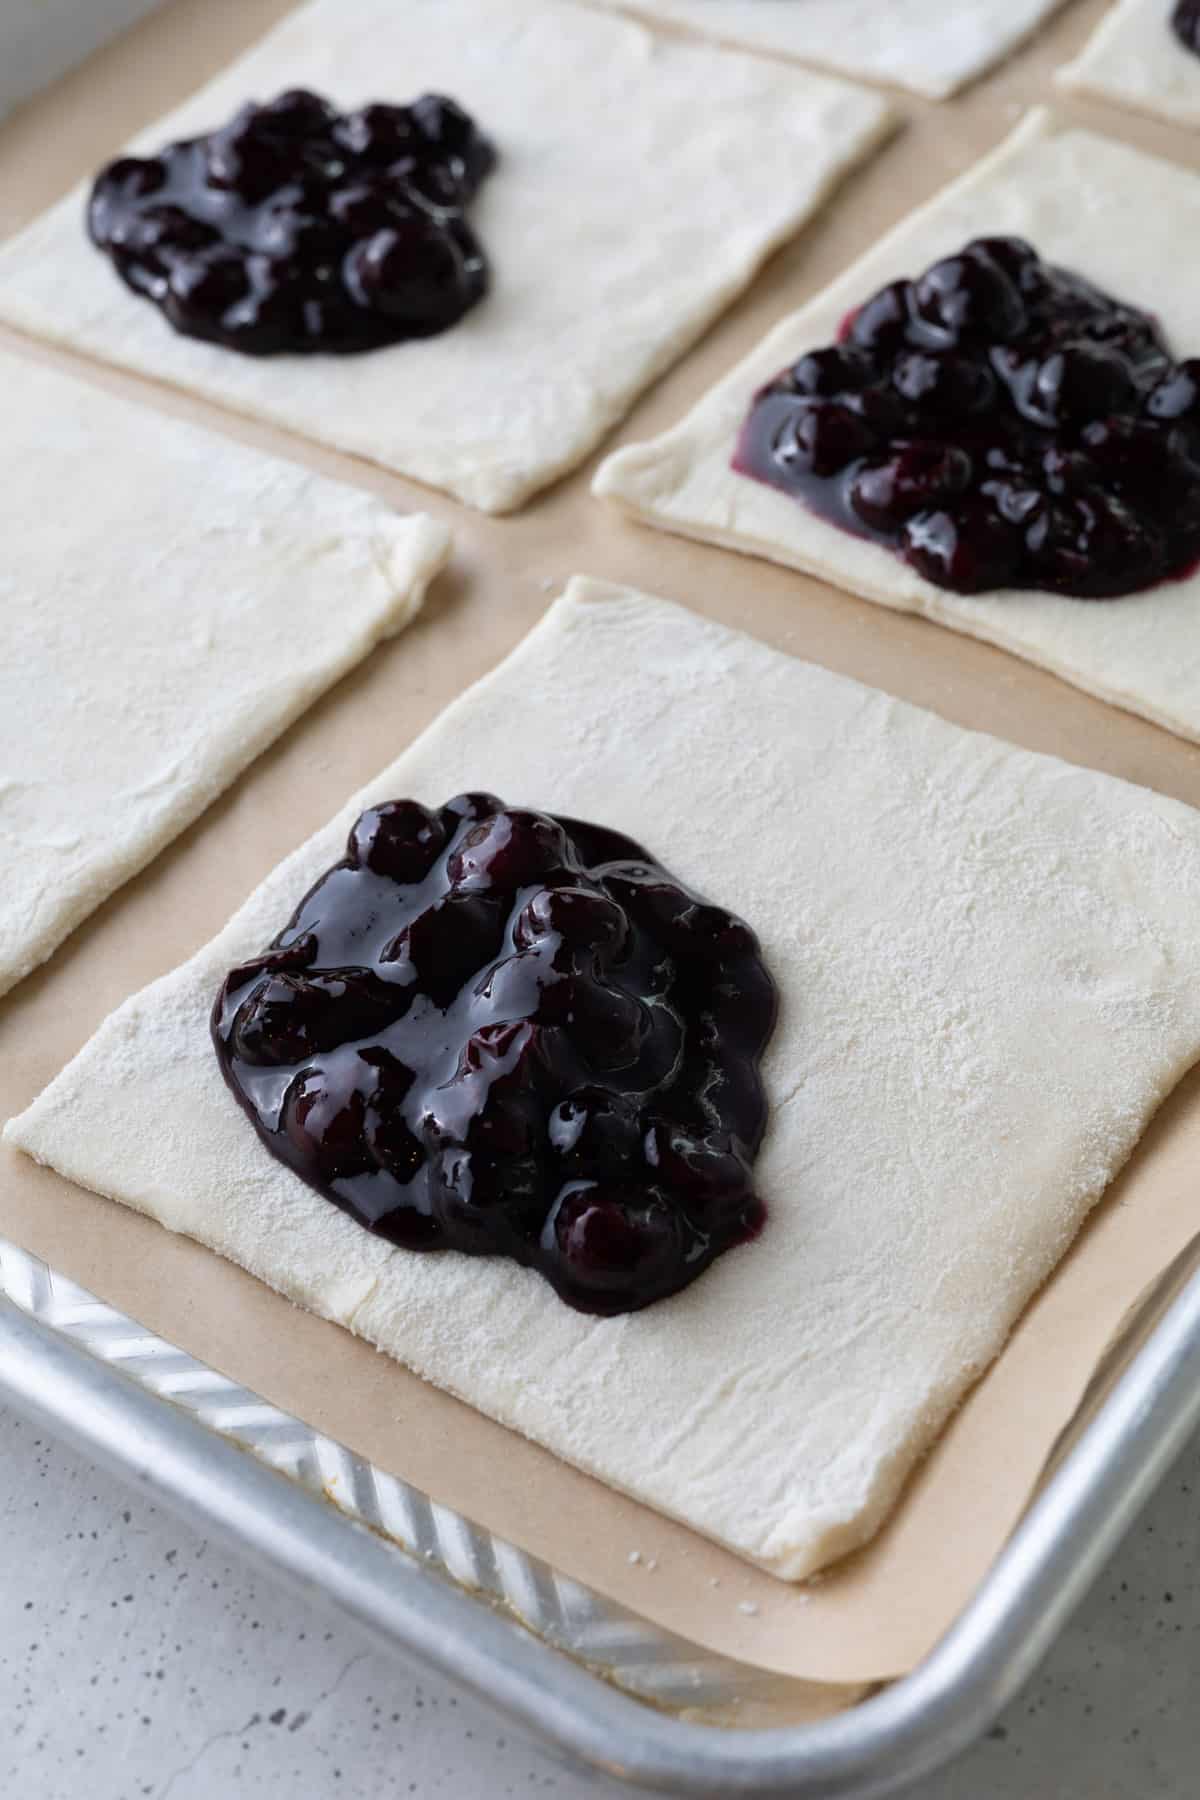 Blueberry filling-topped puff pastry squares on a parchment-lined baking tray.